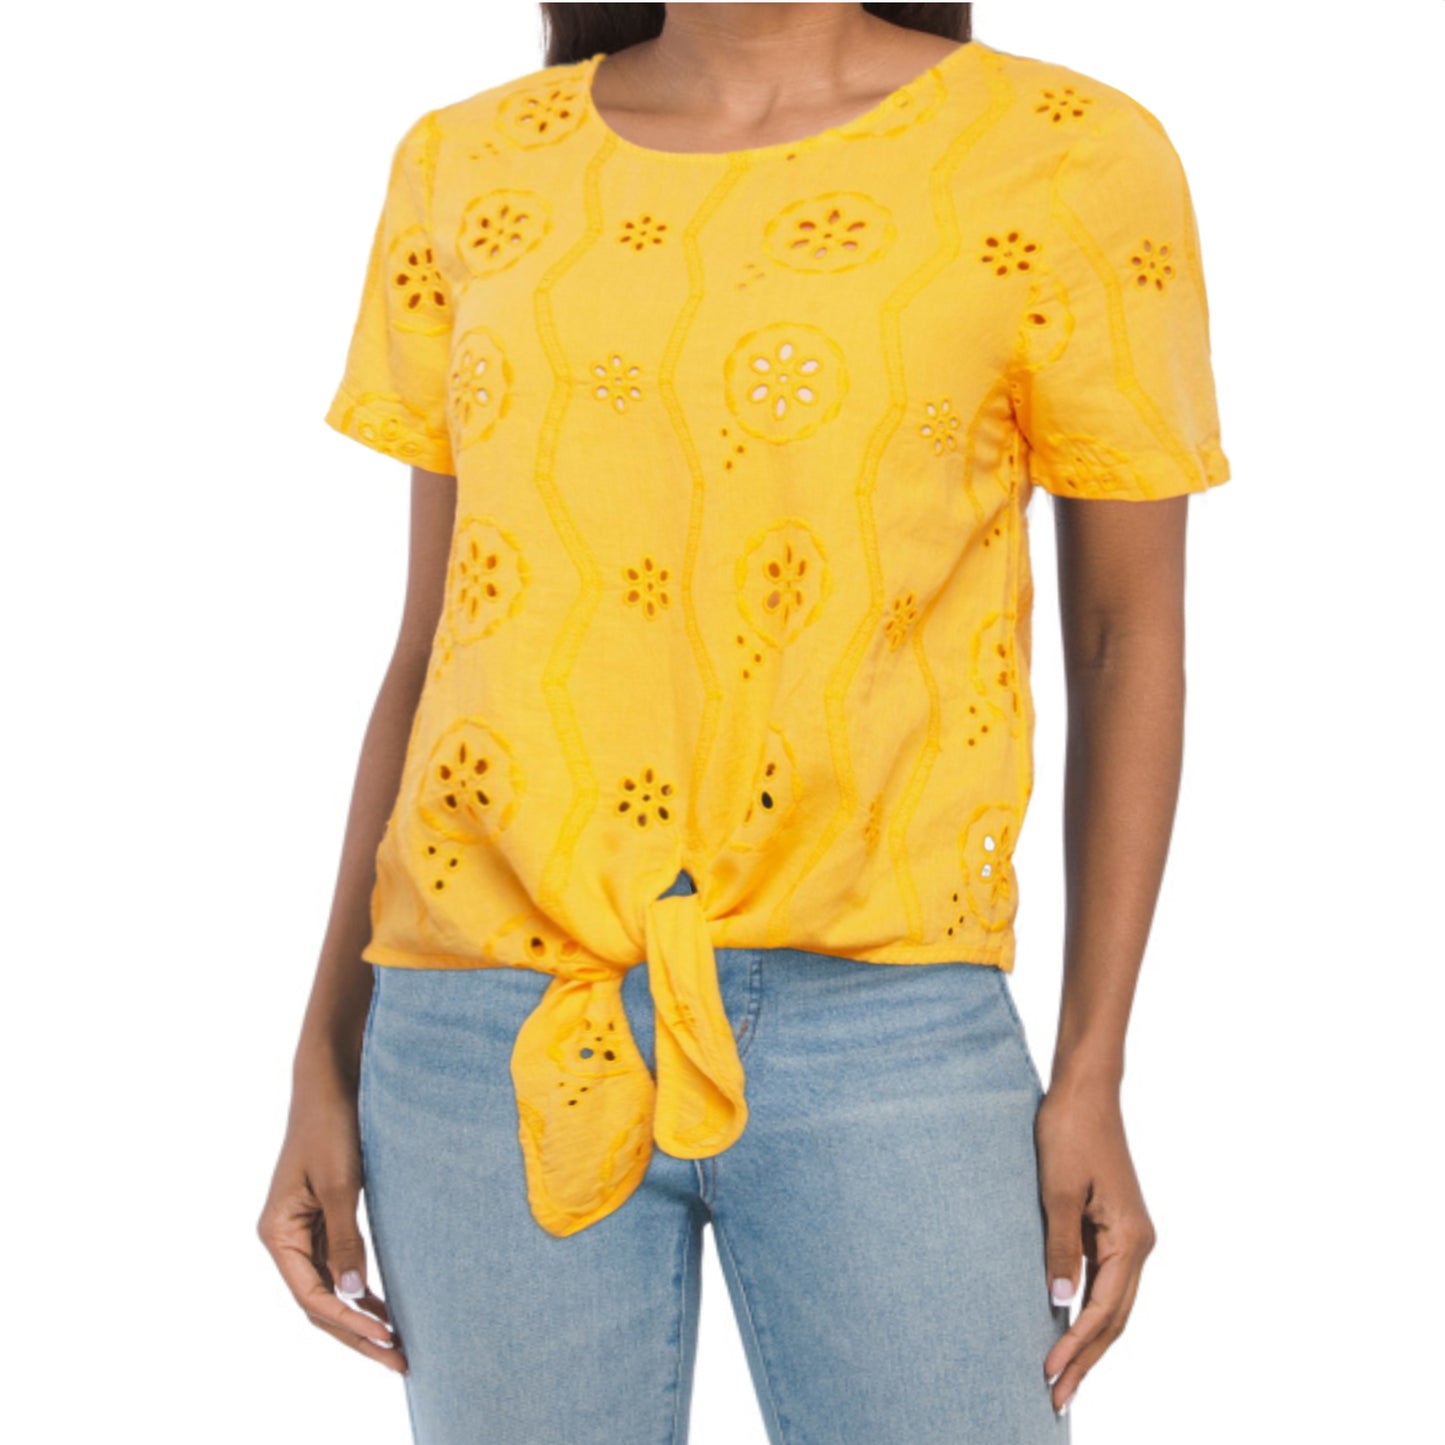 Christian Siriano Linen / Cotton Blend Tie-Front Eyelet Blouse Shirt